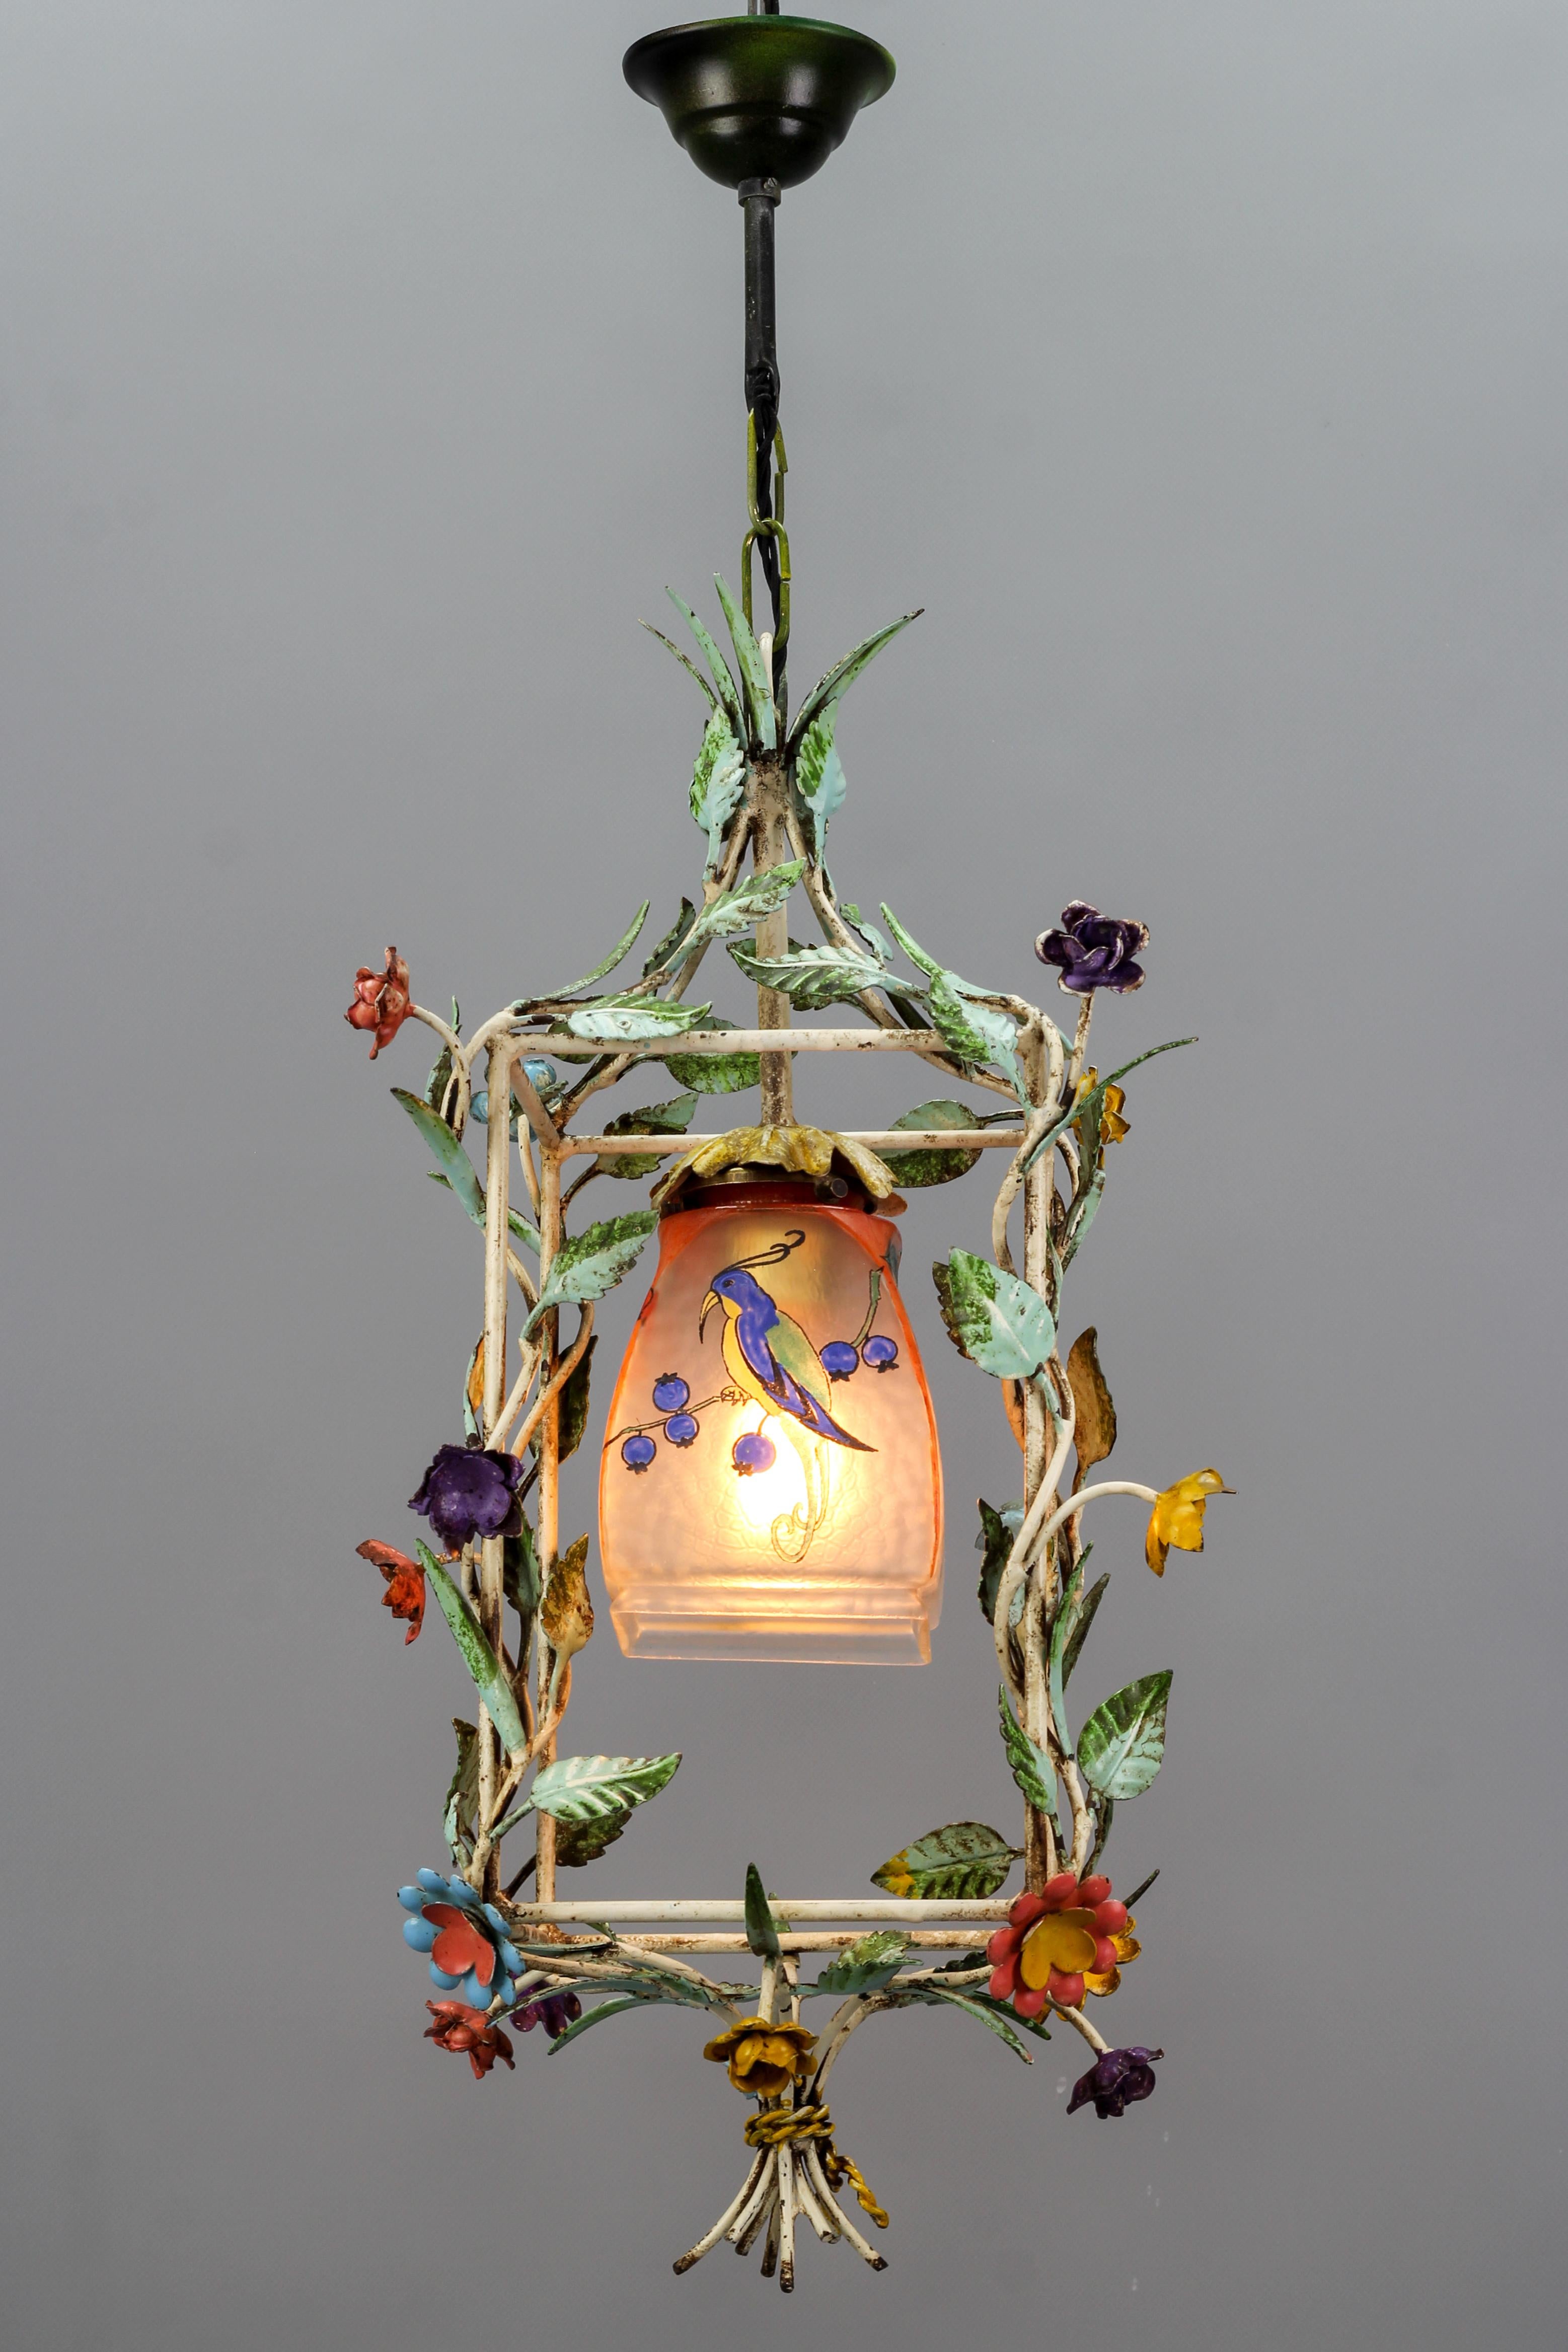 French Tole and glass polychrome pastel flower cage pendant light, circa the 1950s.
Adorable cage-shaped pendant light fixture made of hand-painted metal in polychrome pastel tones, adorned with flowers and leaves. Single light with a frosted,